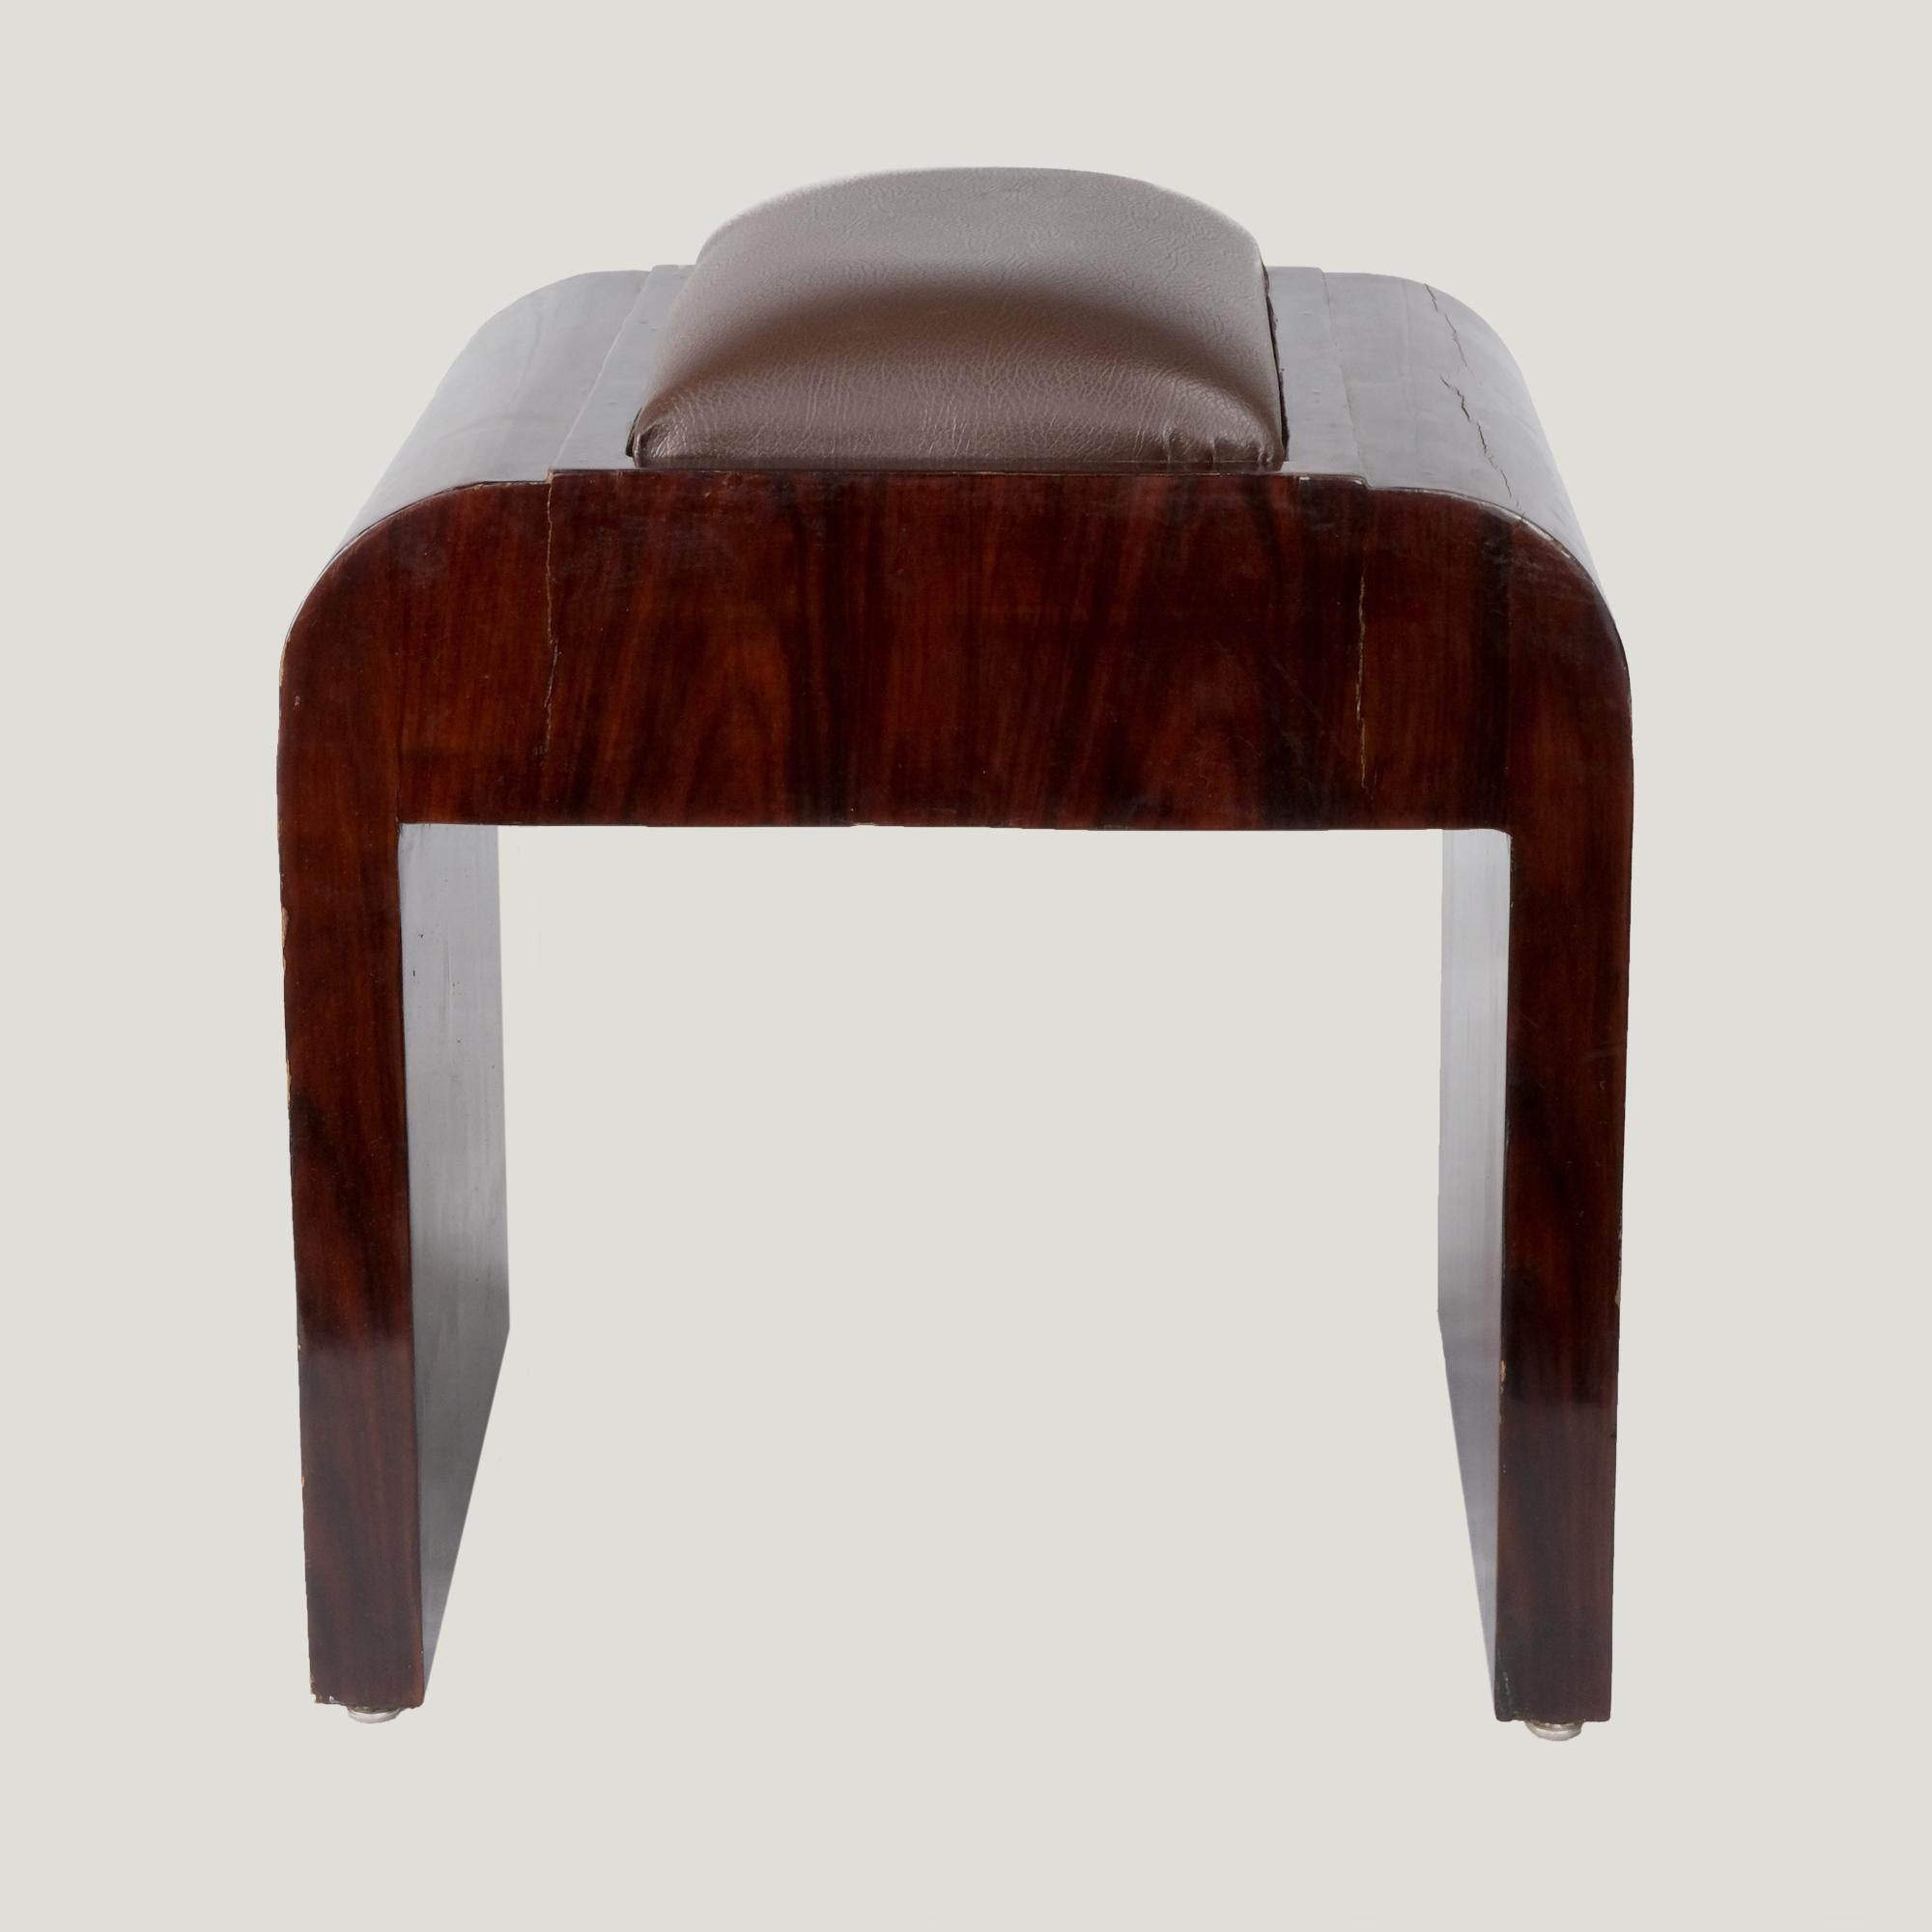 Four Art Deco stools, mahogany veneered wood trimmed with leather.
Small accidents. 49x43x39.5 cm.
French work 1921.

These stools fit perfectly into the Art Deco style with pure, straight and geometric lines echoing cubist painting.
We are here,